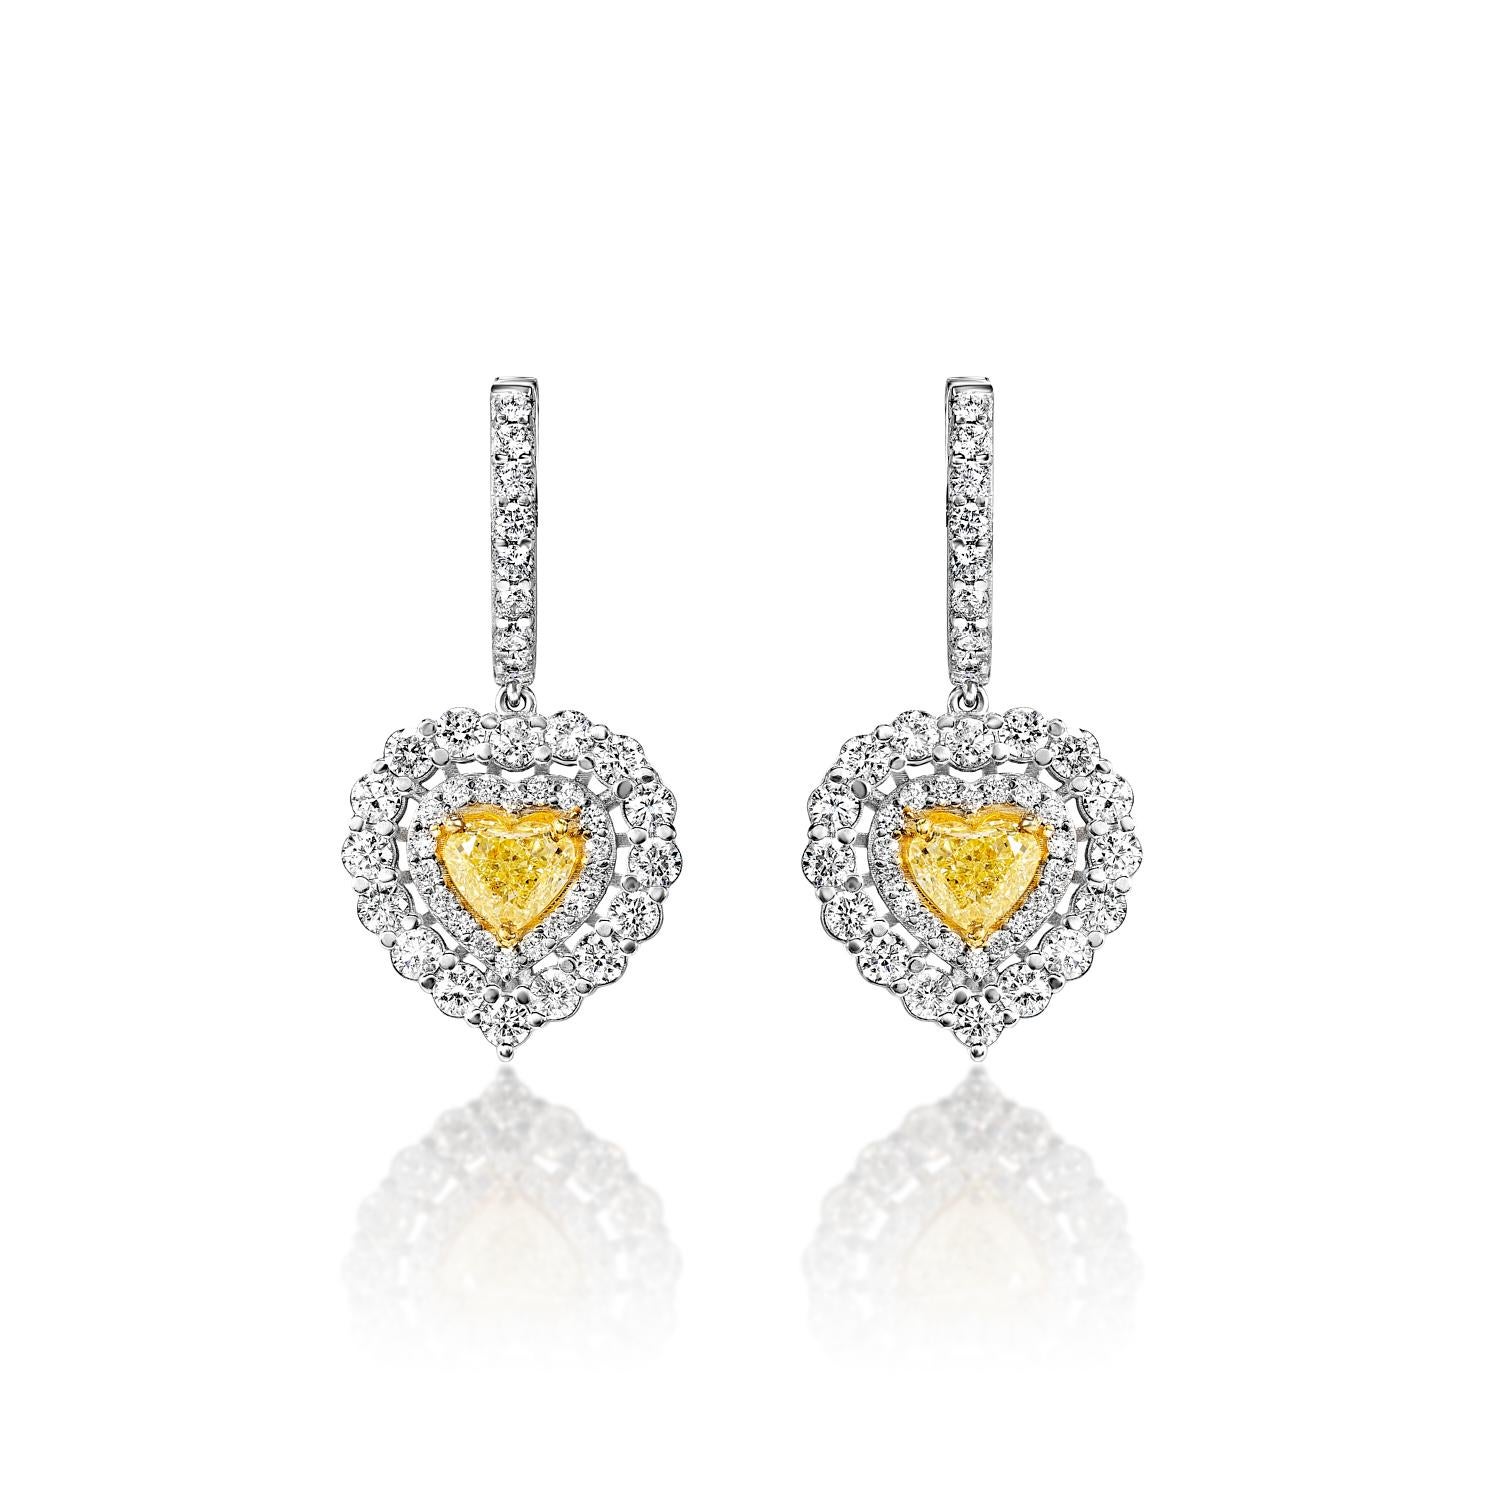 Heart Diamond Hanging Earrings For Ladies:

Main Diamonds:
Carat Weight: 2.78 Carats
Color: Yellow
Shape: Combine Mix Shape (CMB)

Metal: 14 Karat White Gold
Setting: Halo, Shared Prong & 3 Round Prong
Style: Hanging Earrings

Total Carat Weight: